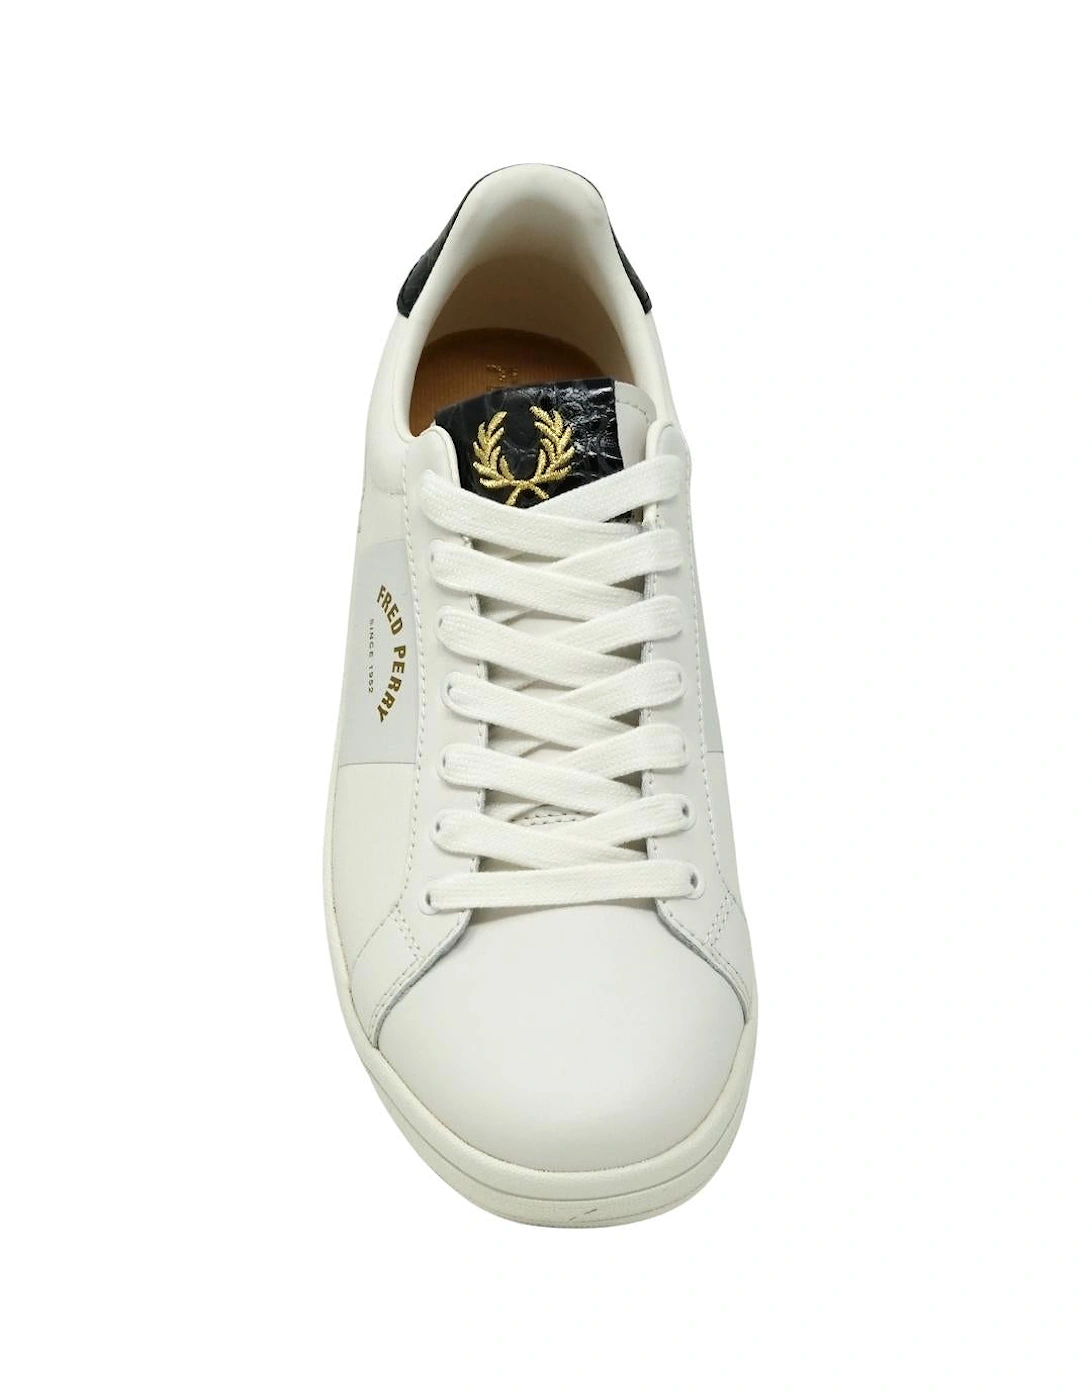 B1271 303 White Leather Trainers